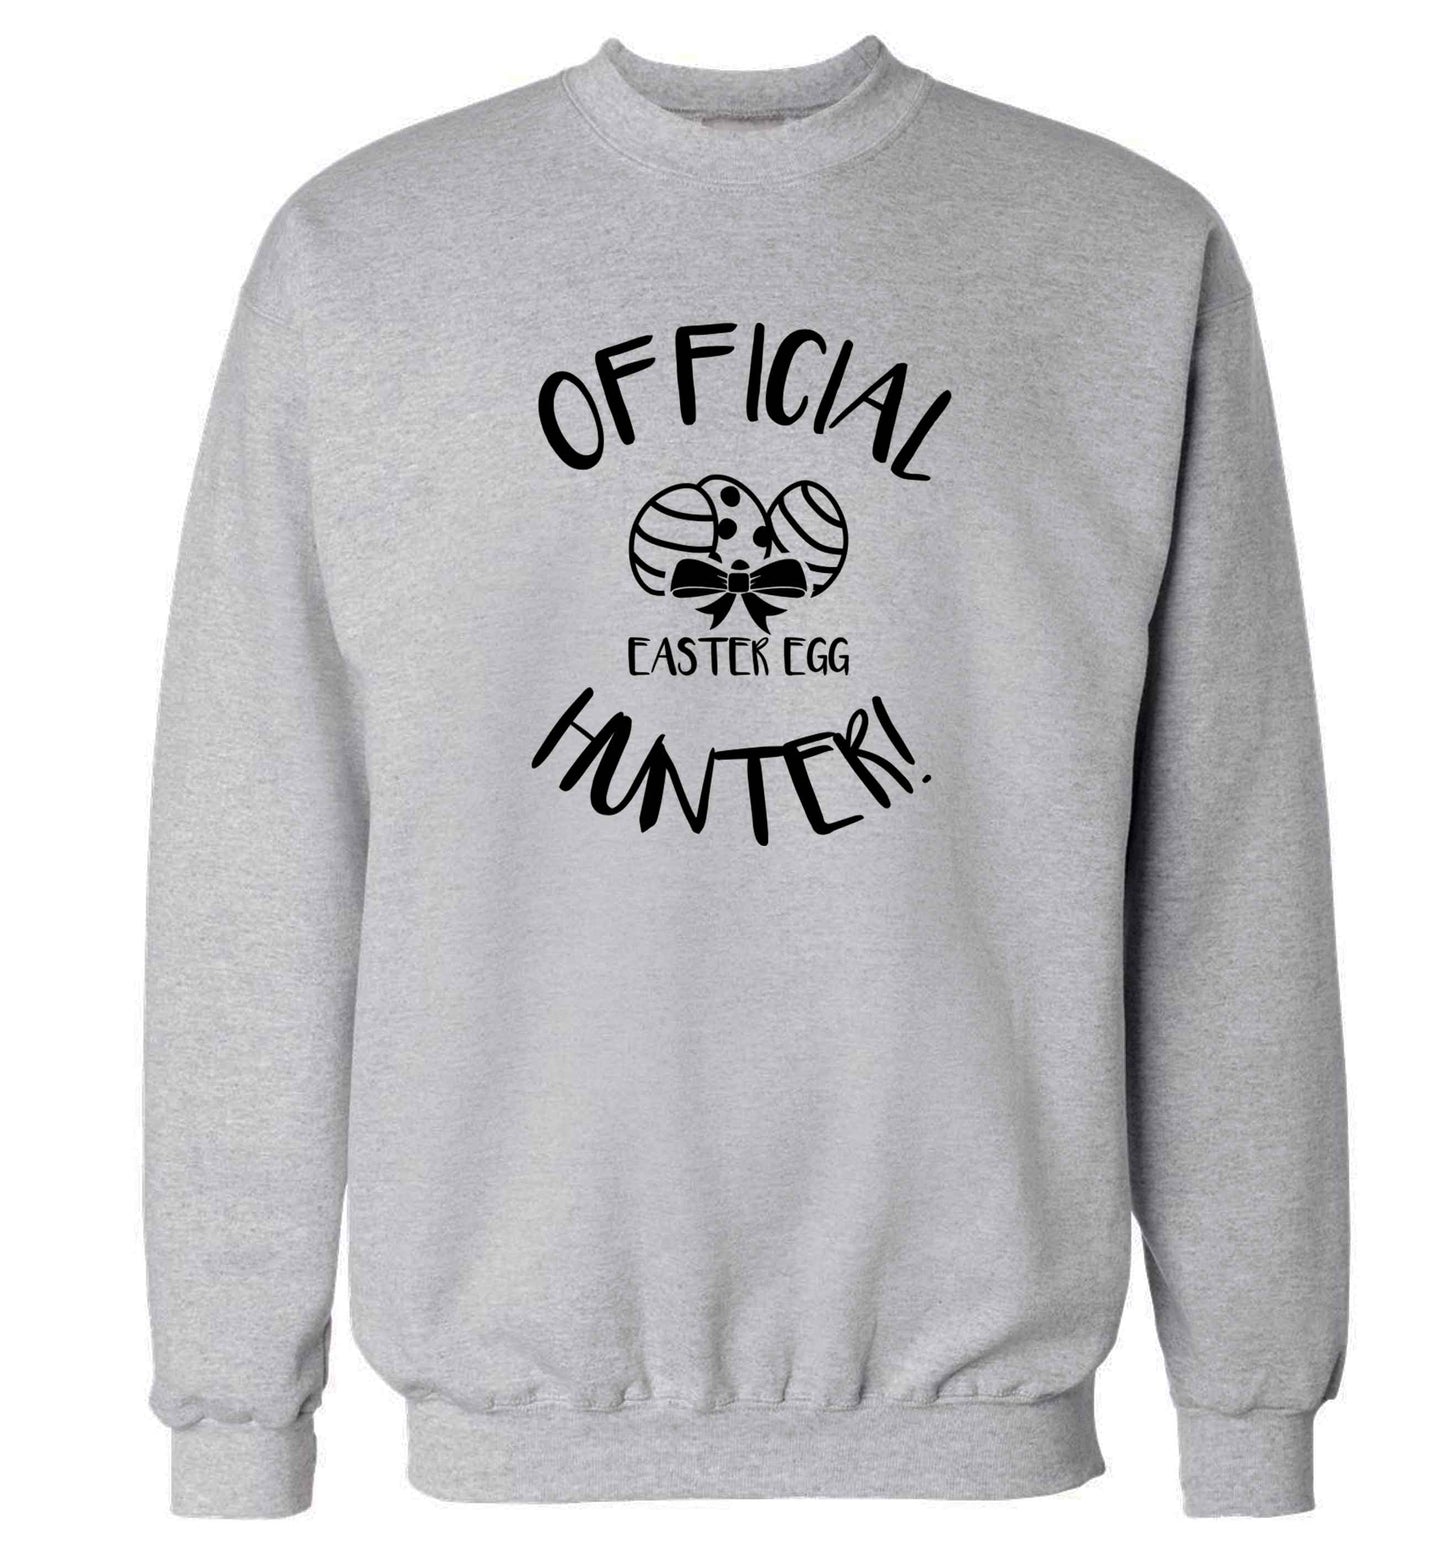 Official Easter egg hunter! adult's unisex grey sweater 2XL